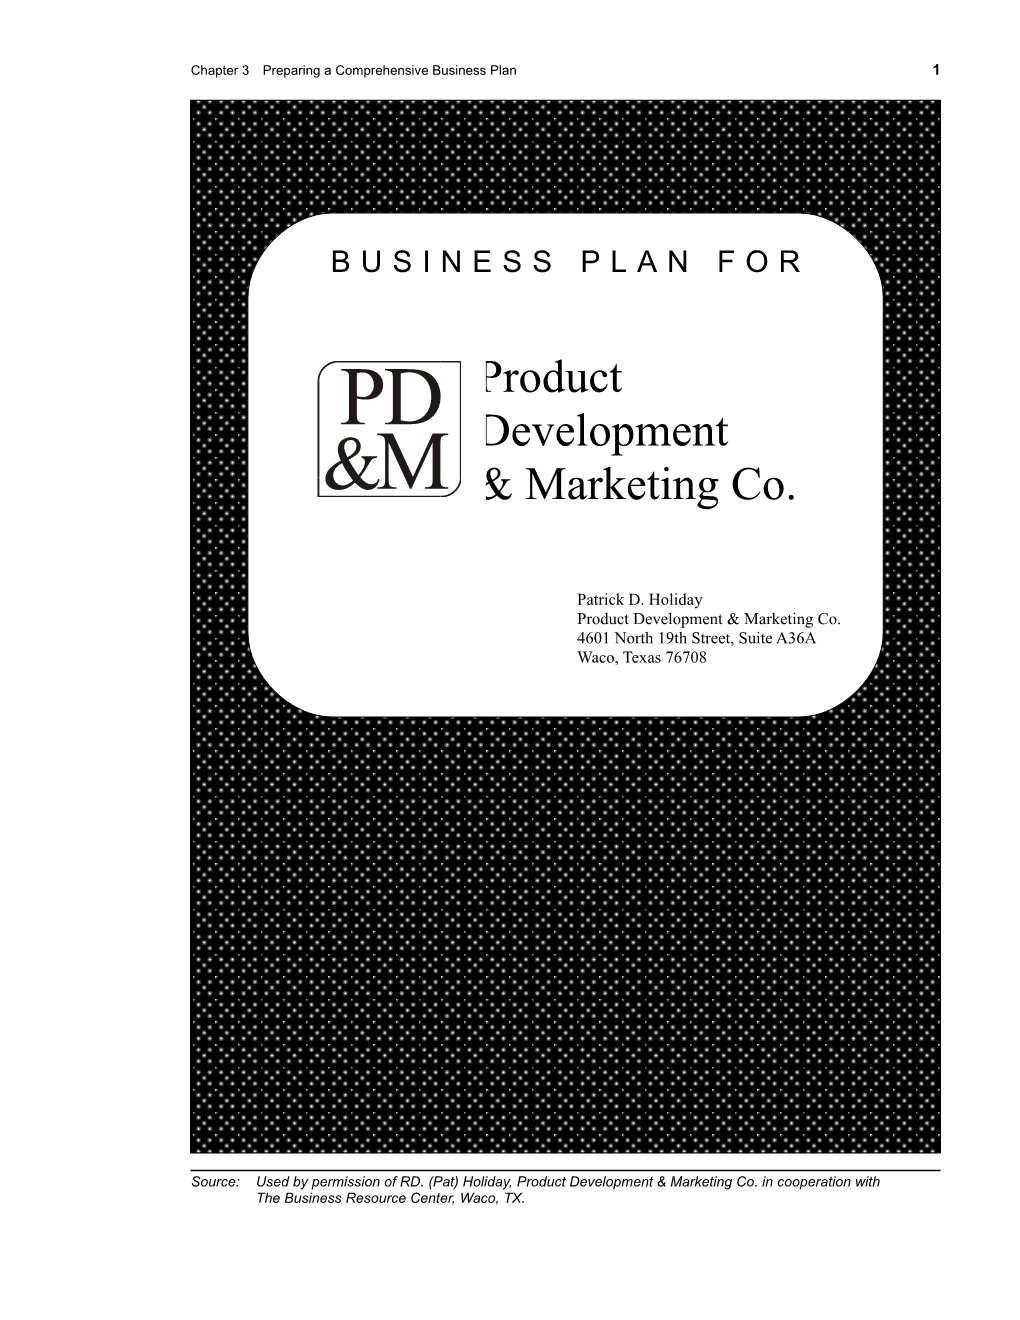 Preparing the Business Plan: Resources for the Classroom